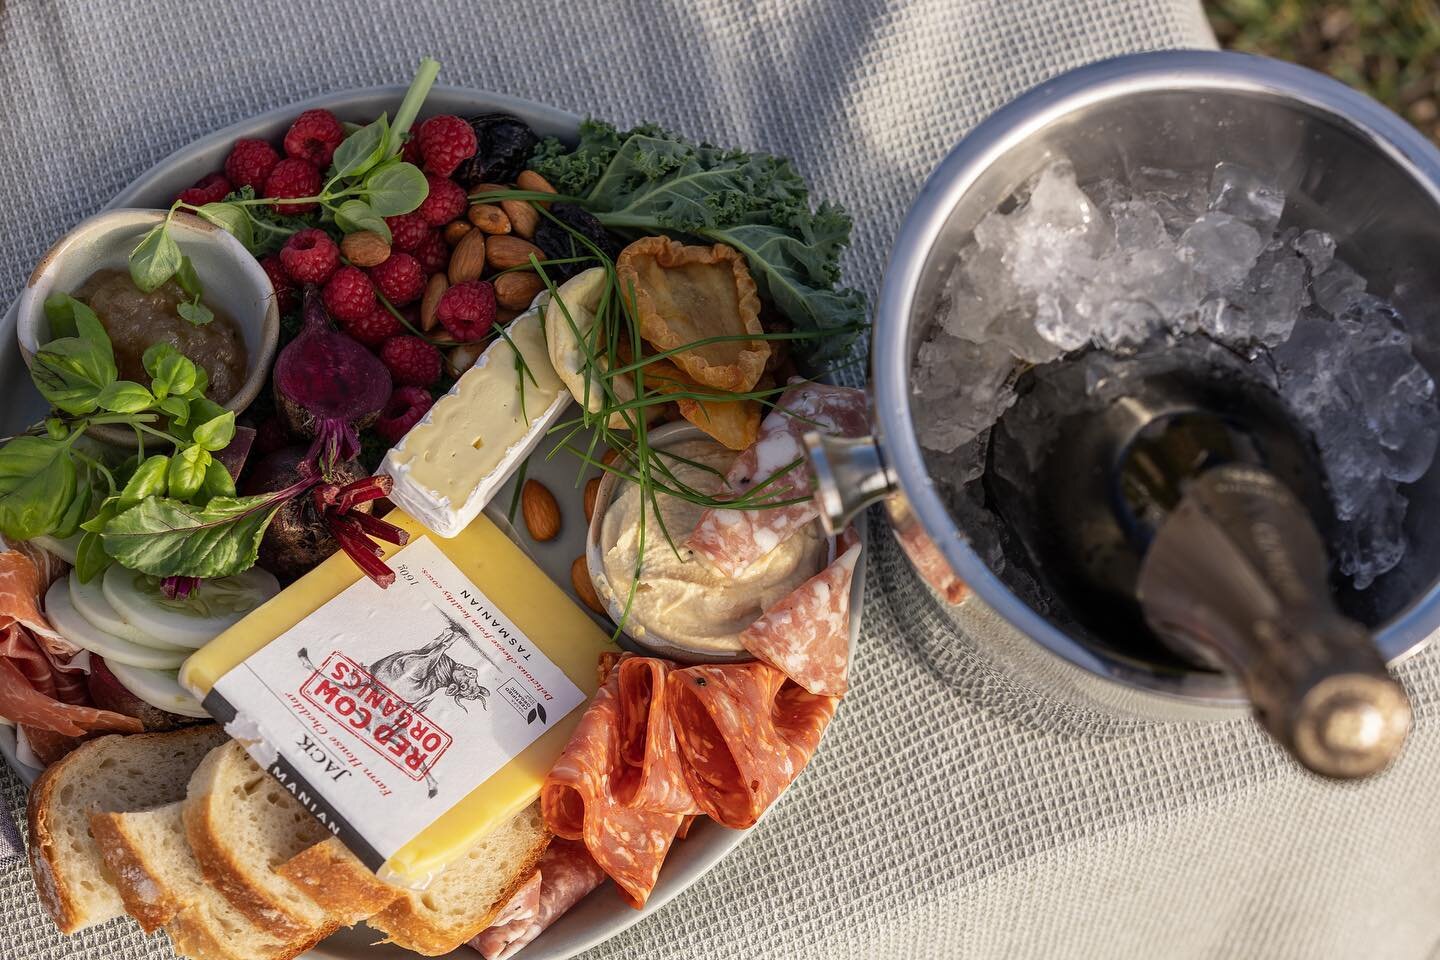 Our Private Island Picnic tour is supported by fabulous local businesses such as @ellesmere_patprov 
With wonderful grazing hampers full of Tassie produce, sit back and enjoy a picnic like no other 🧺 
And we never forget a bottle of @cloverhillwines